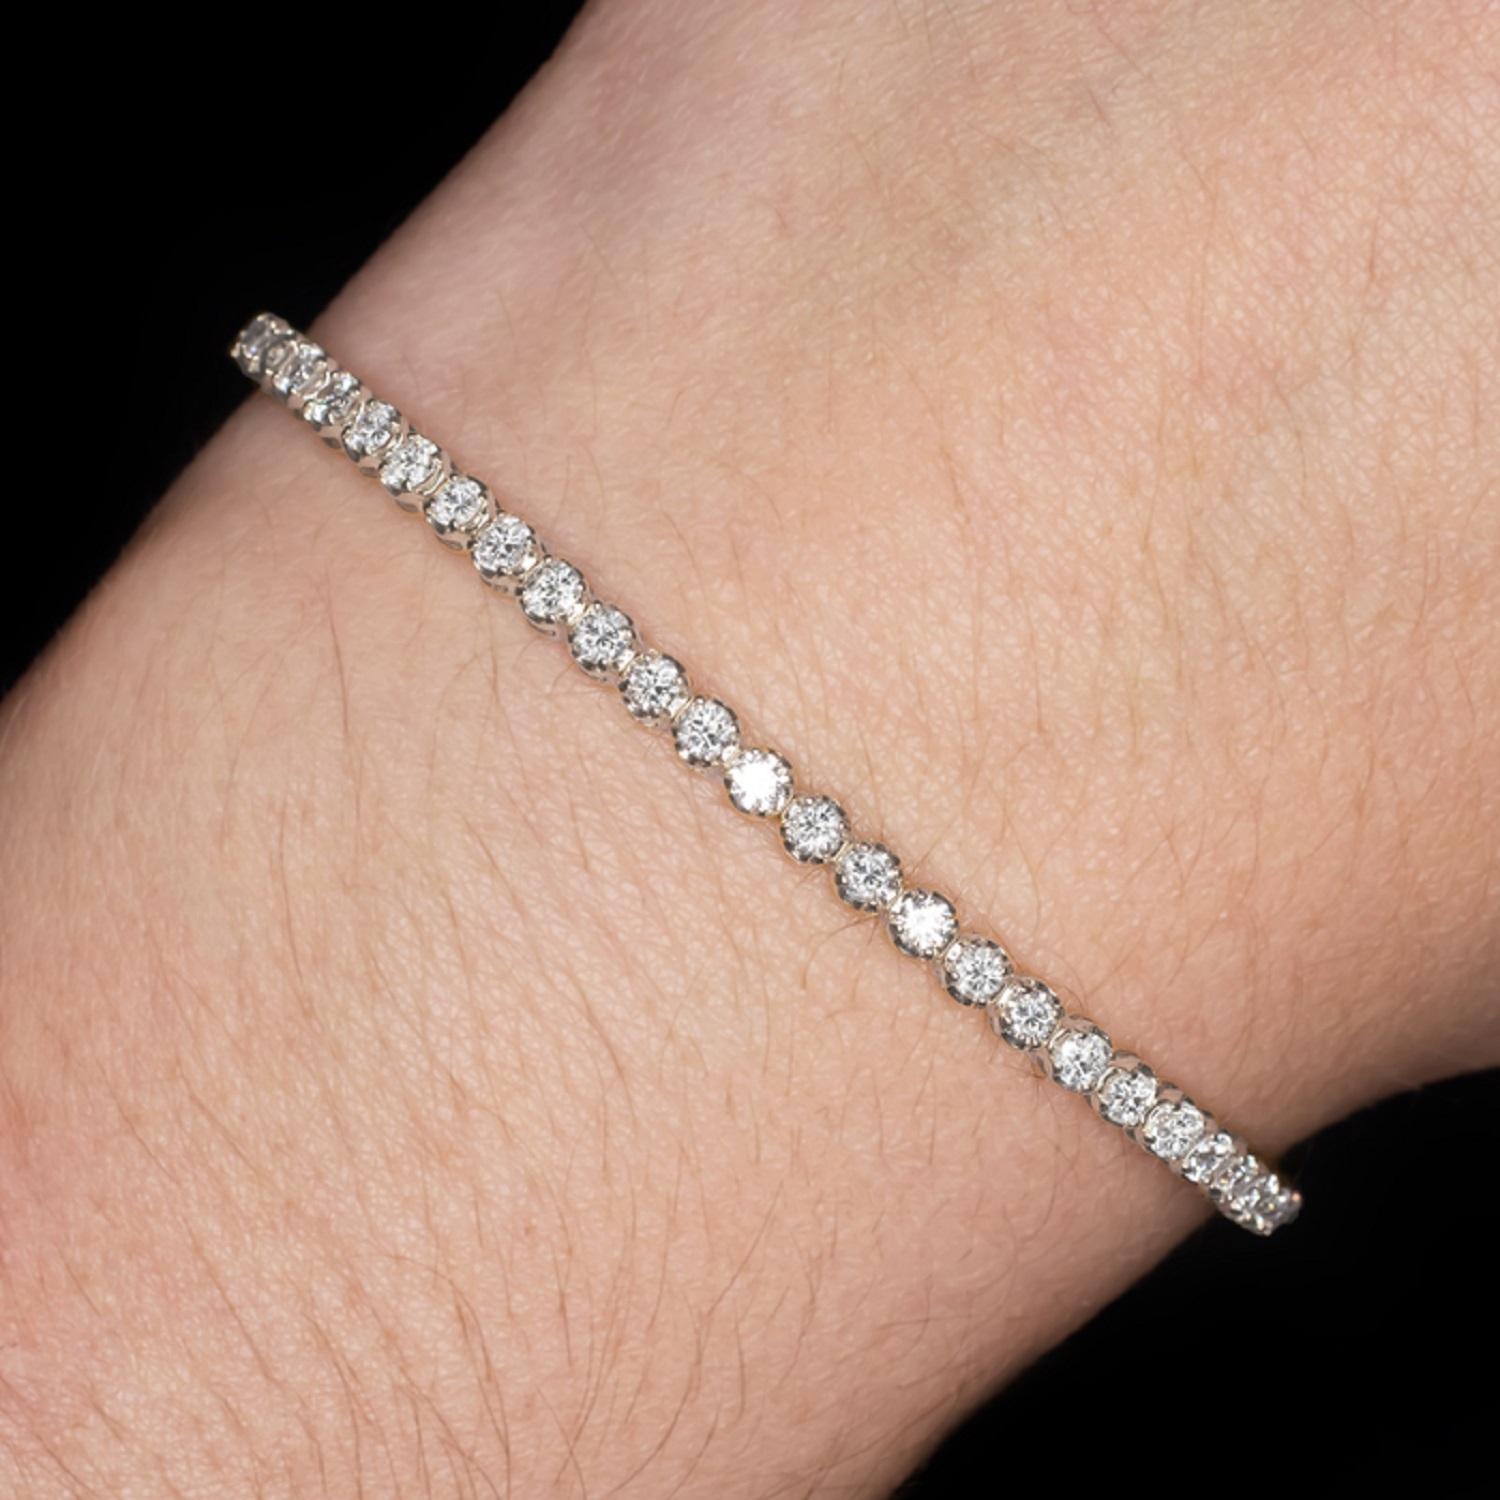 Brilliantly sparkling tennis bracelet has a classic design that will never go out of style! Featuring 3 carats of bright white, eye clean diamonds, this beauty offers brilliant, eye catching sparkle. The highly polished, curved settings give the